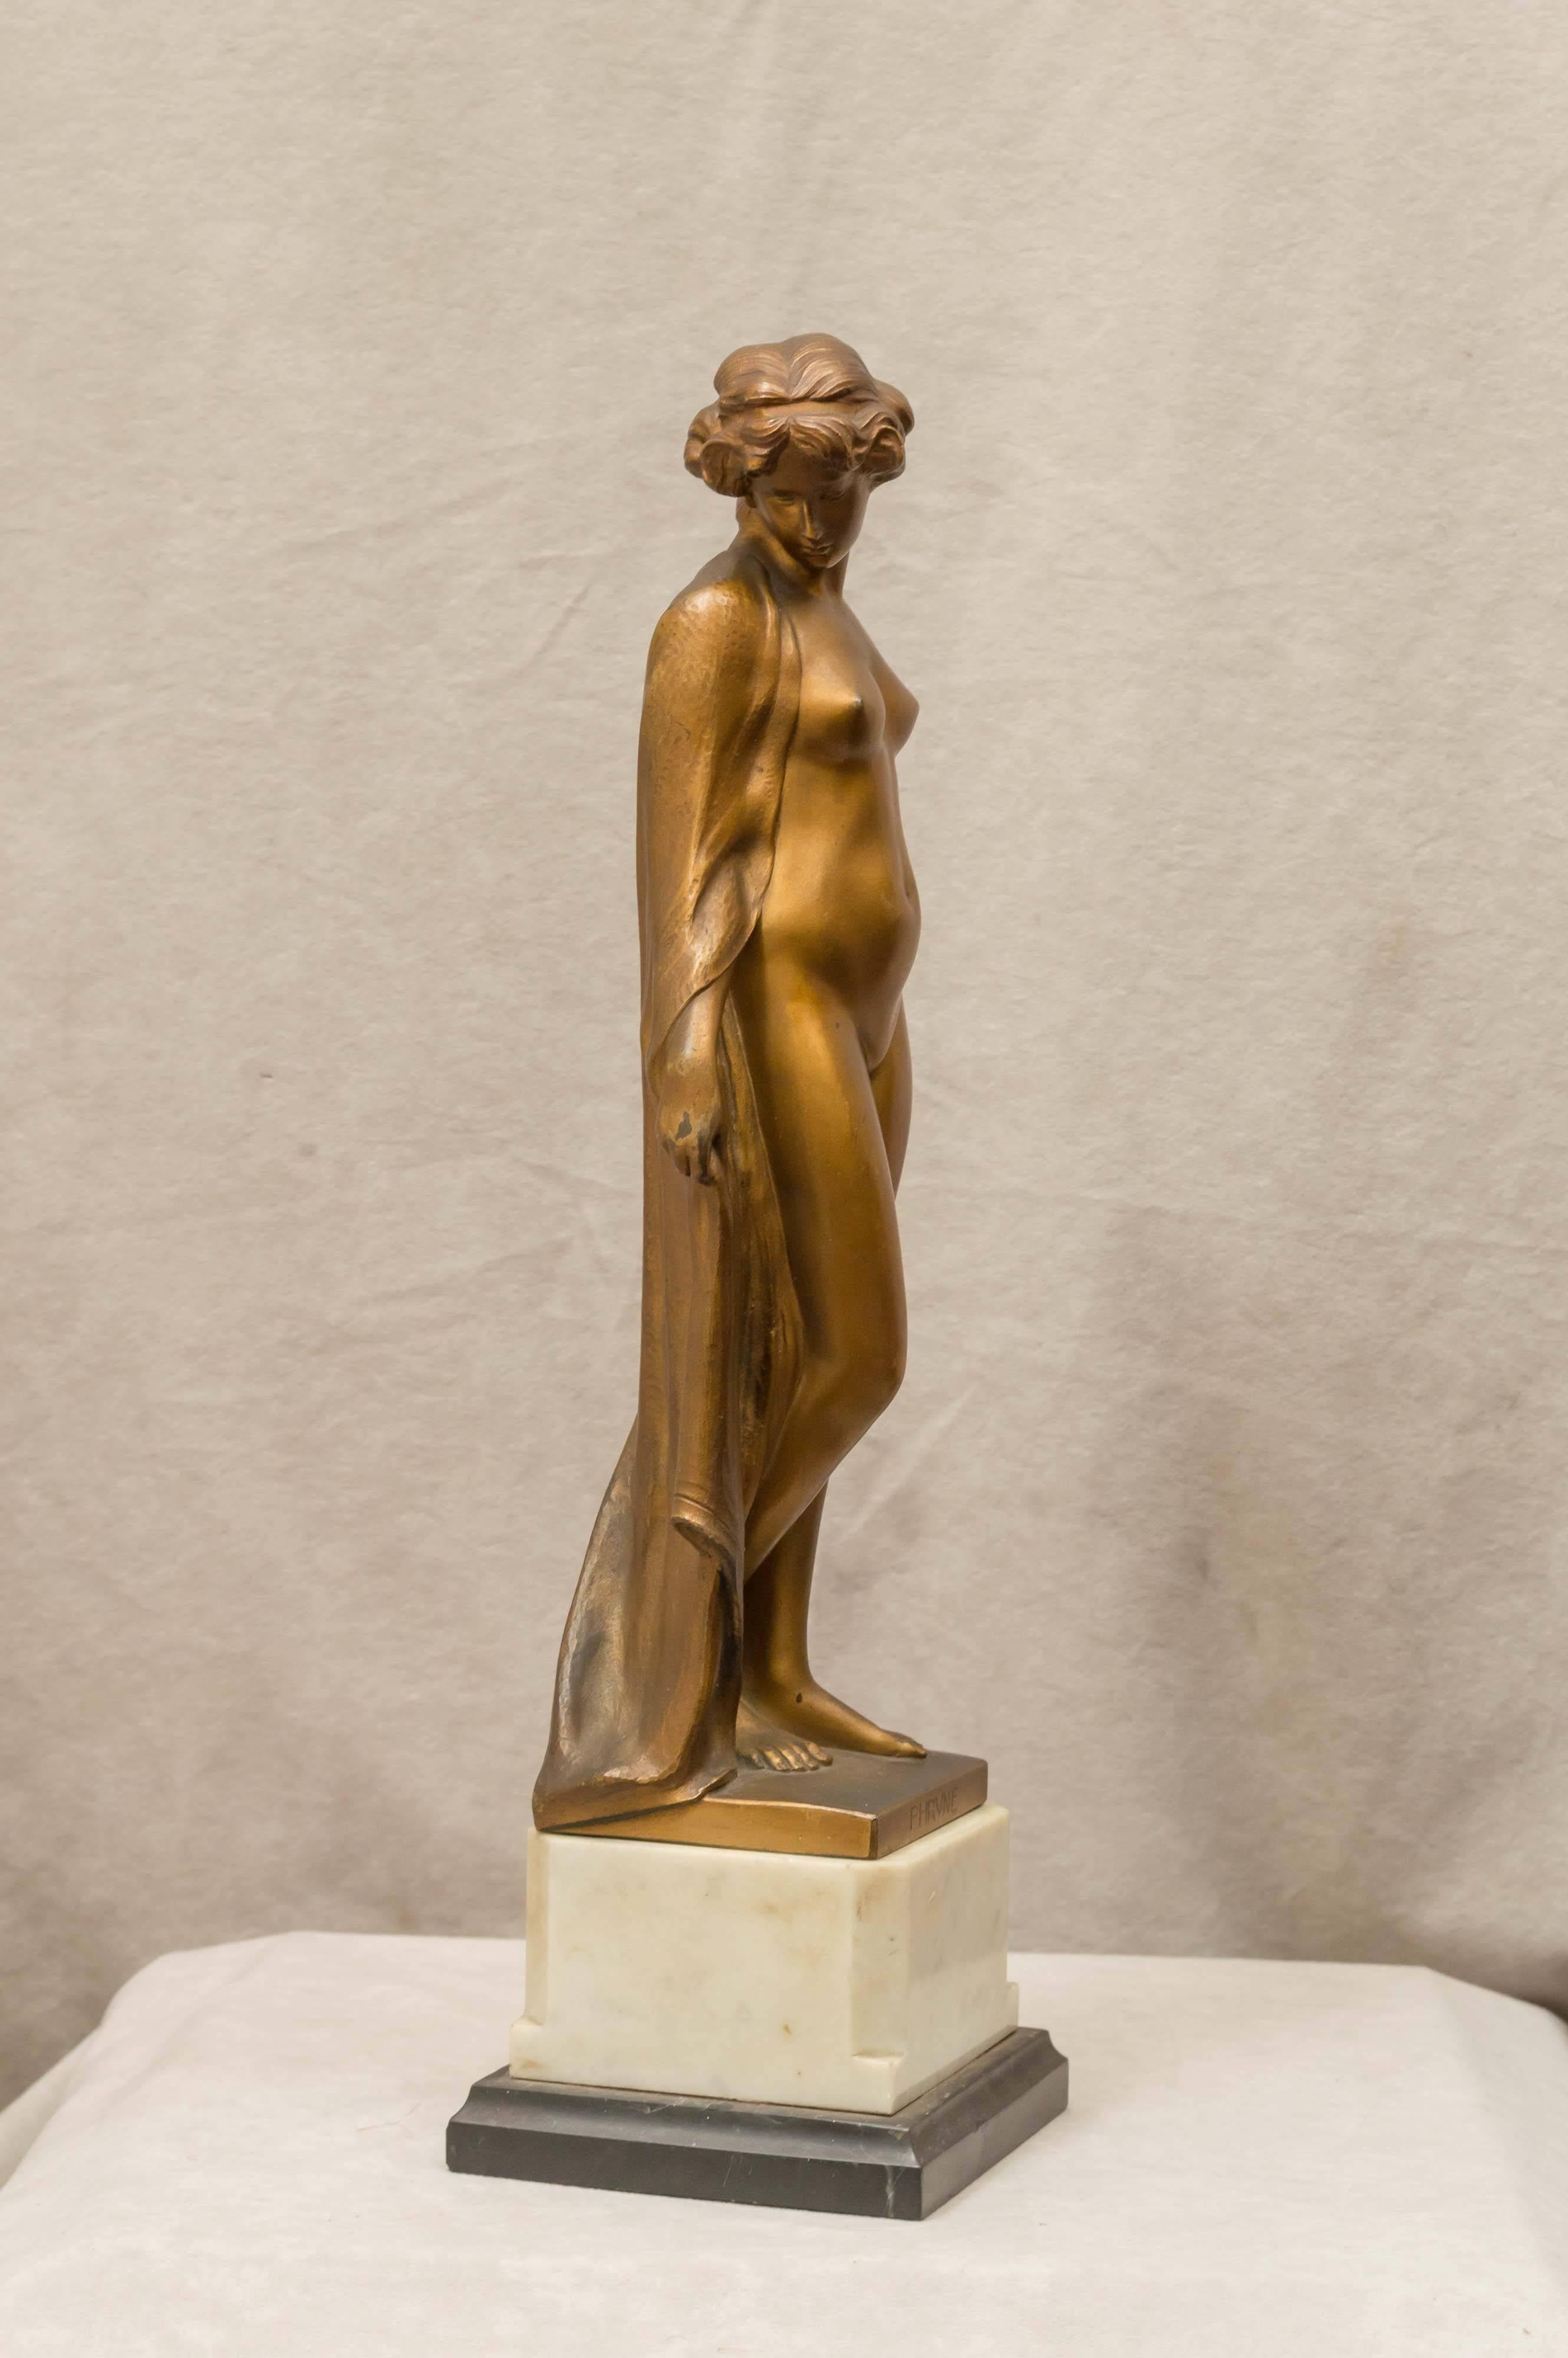 This beautiful model of a nude in gilt bronze is Austrian and artist signed, Franz Peleschka (b 1873). The figure is entitled 